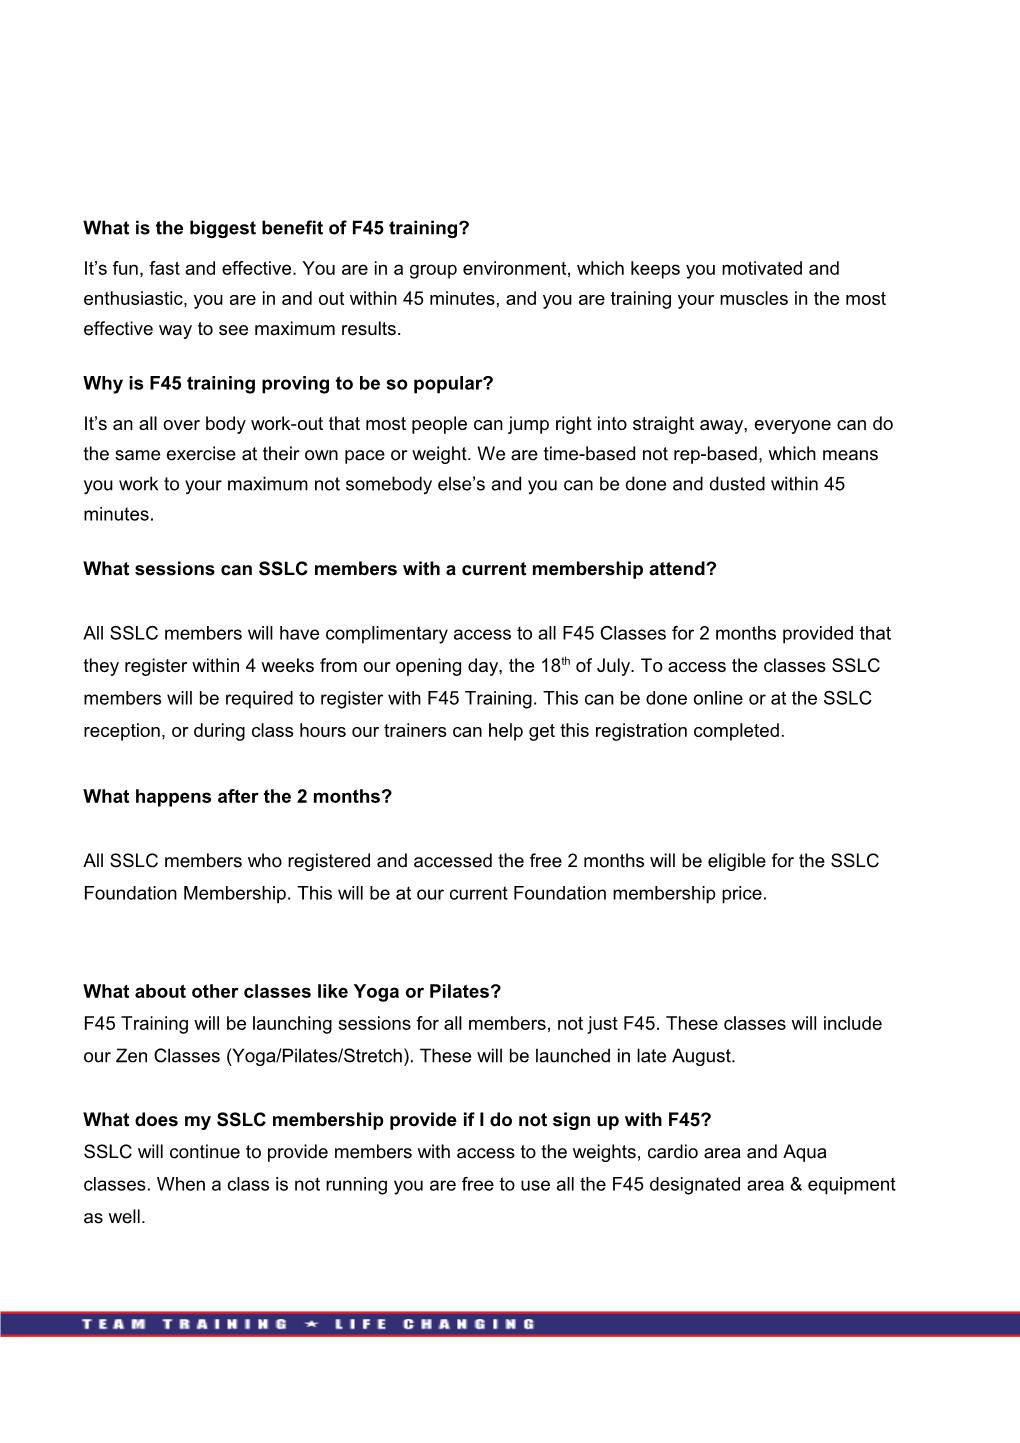 F45 TRAINING Frequently Asked Questions from Current SSLC Members